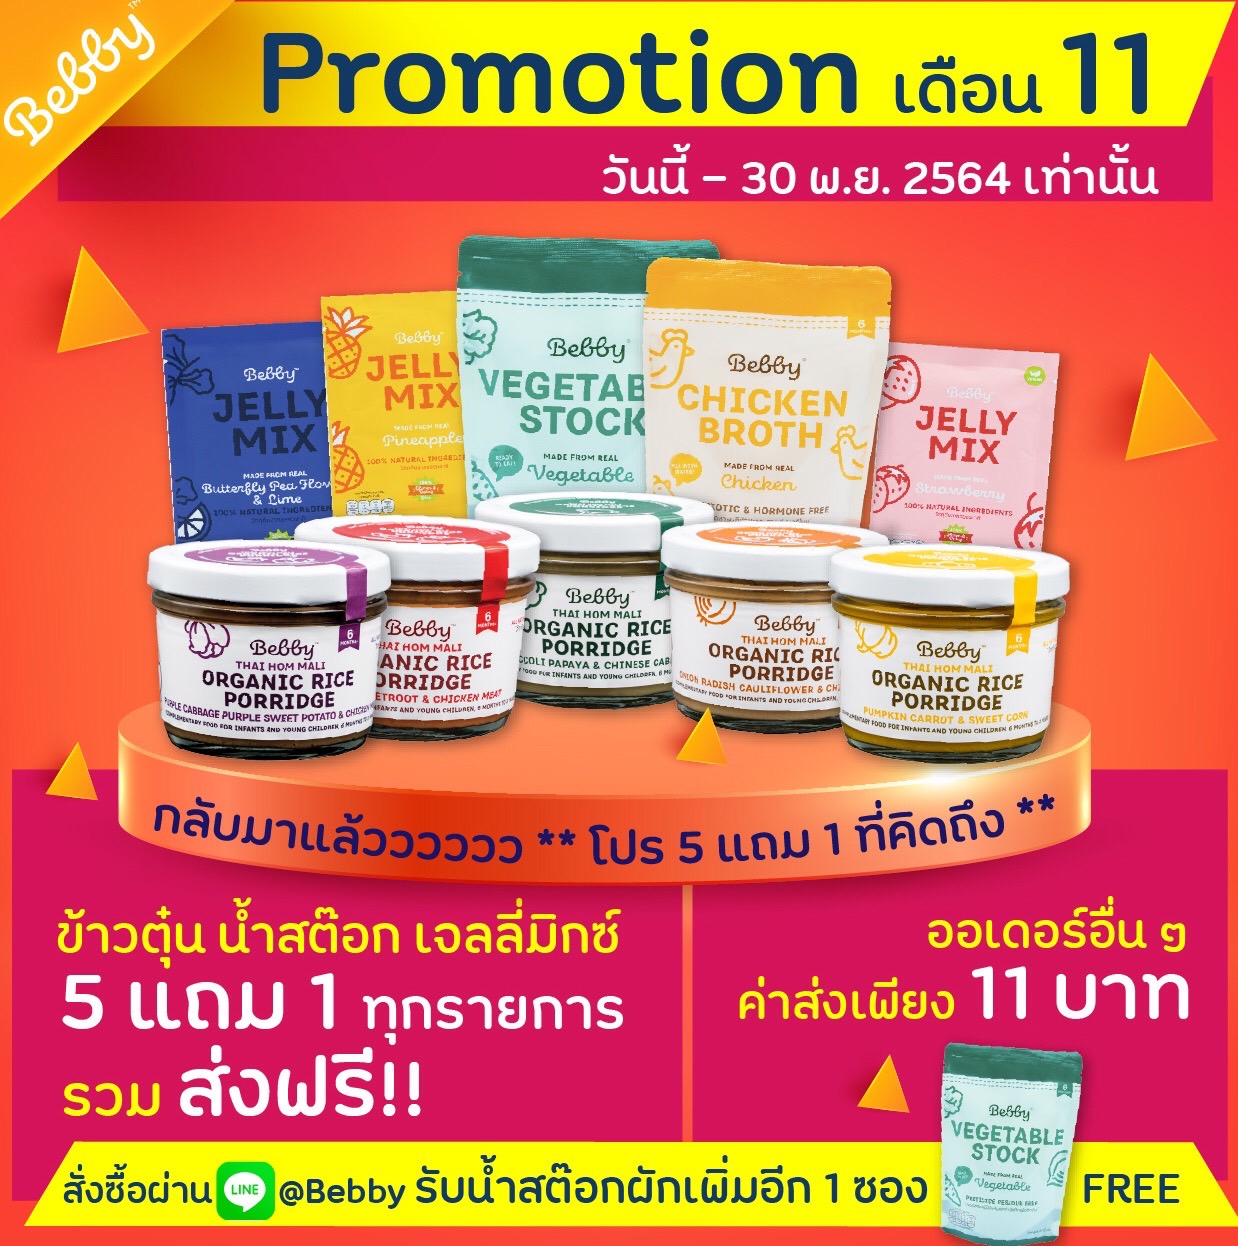 Promotion this month 11.2021